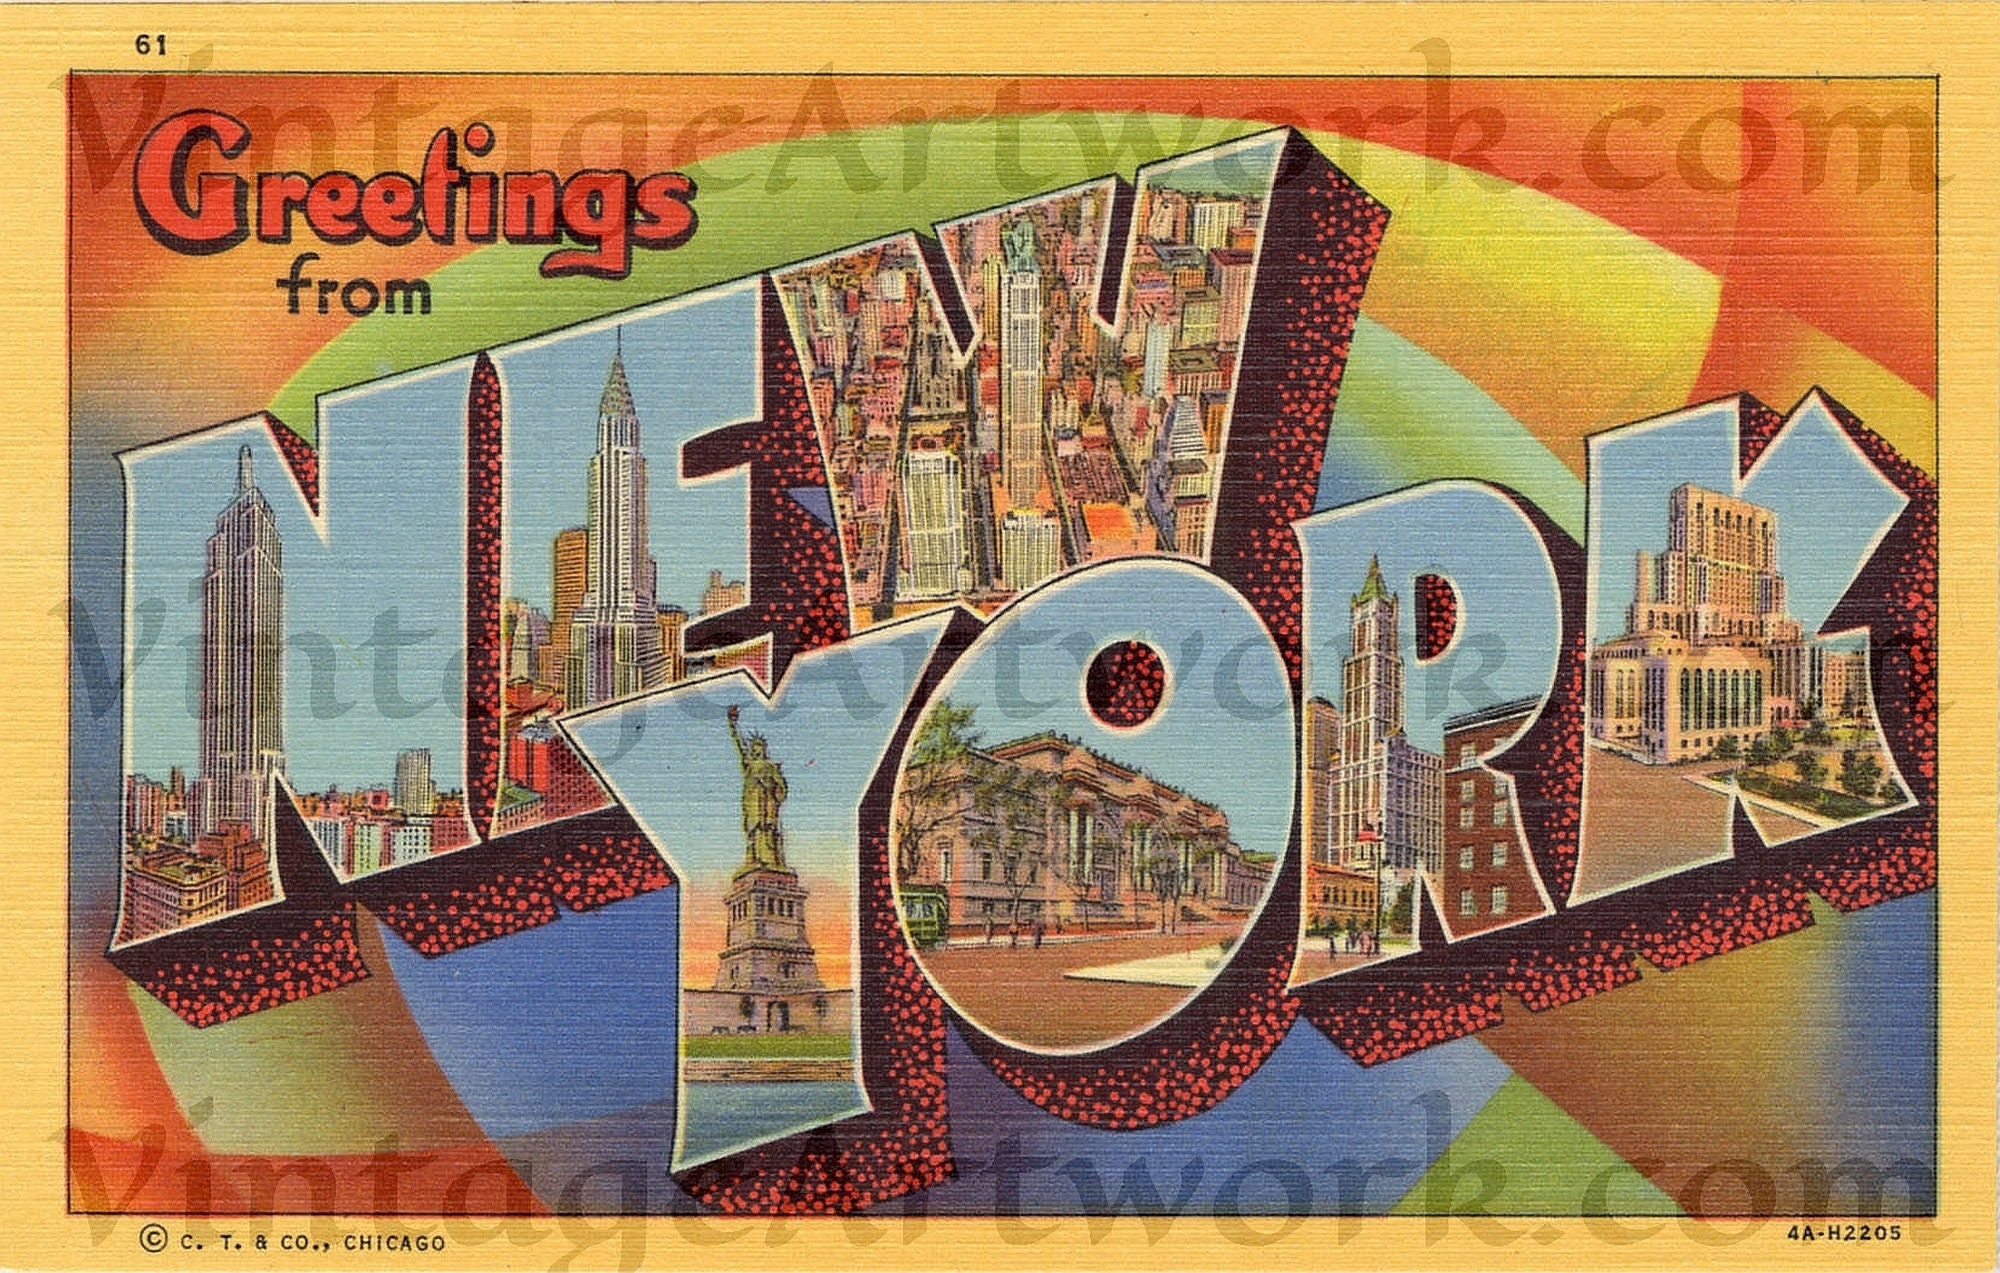 The Immigrant Story Behind the Classic Greetings From Postcards